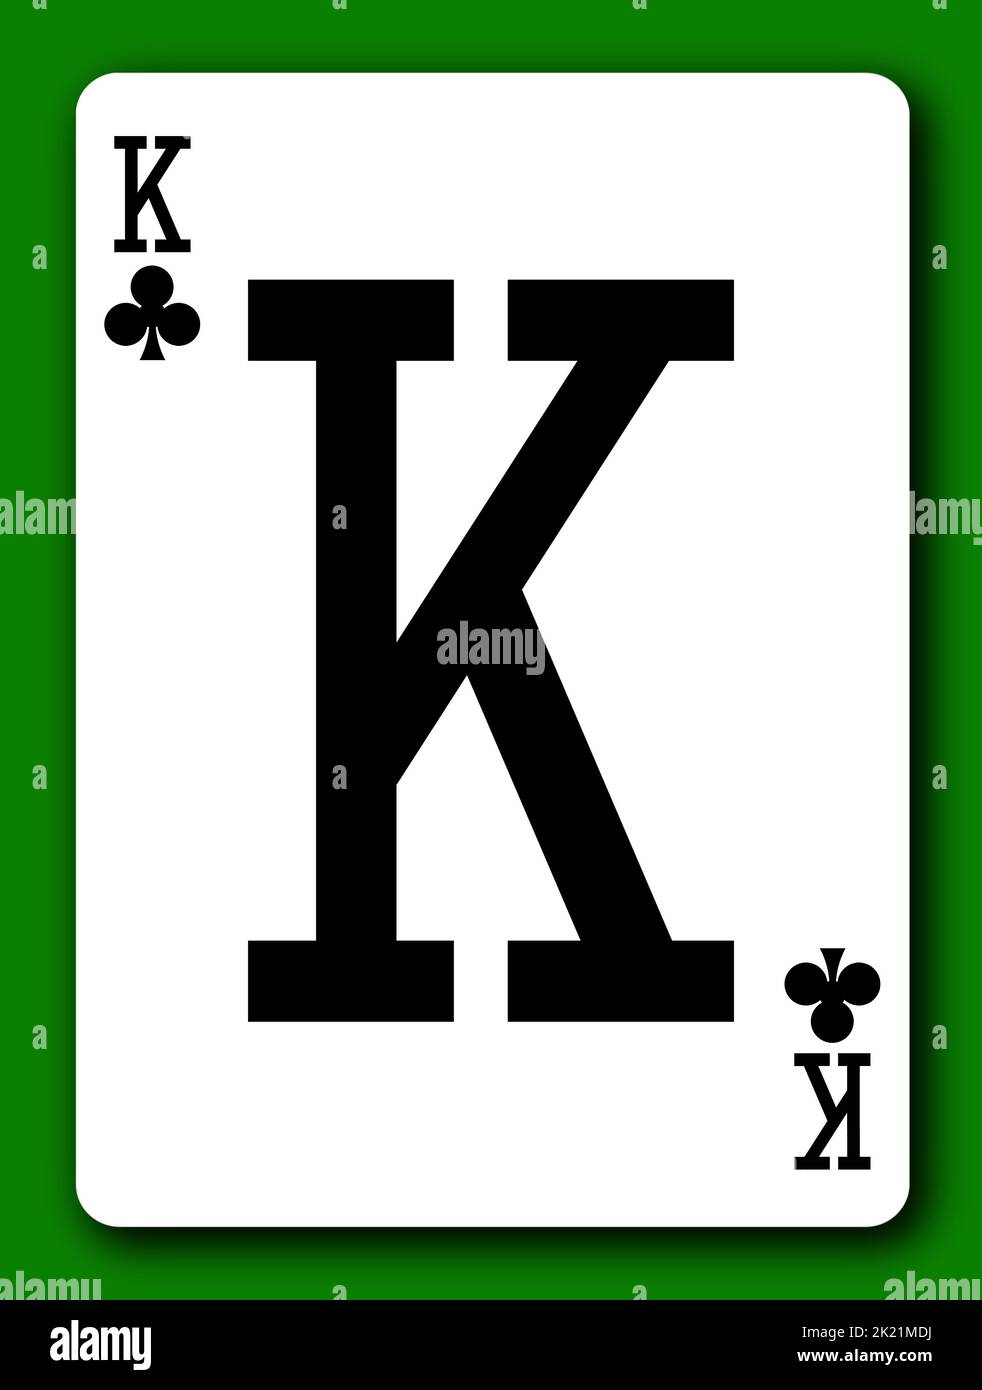 King of Clubs playing card with clipping path to remove background and shadow Stock Photo